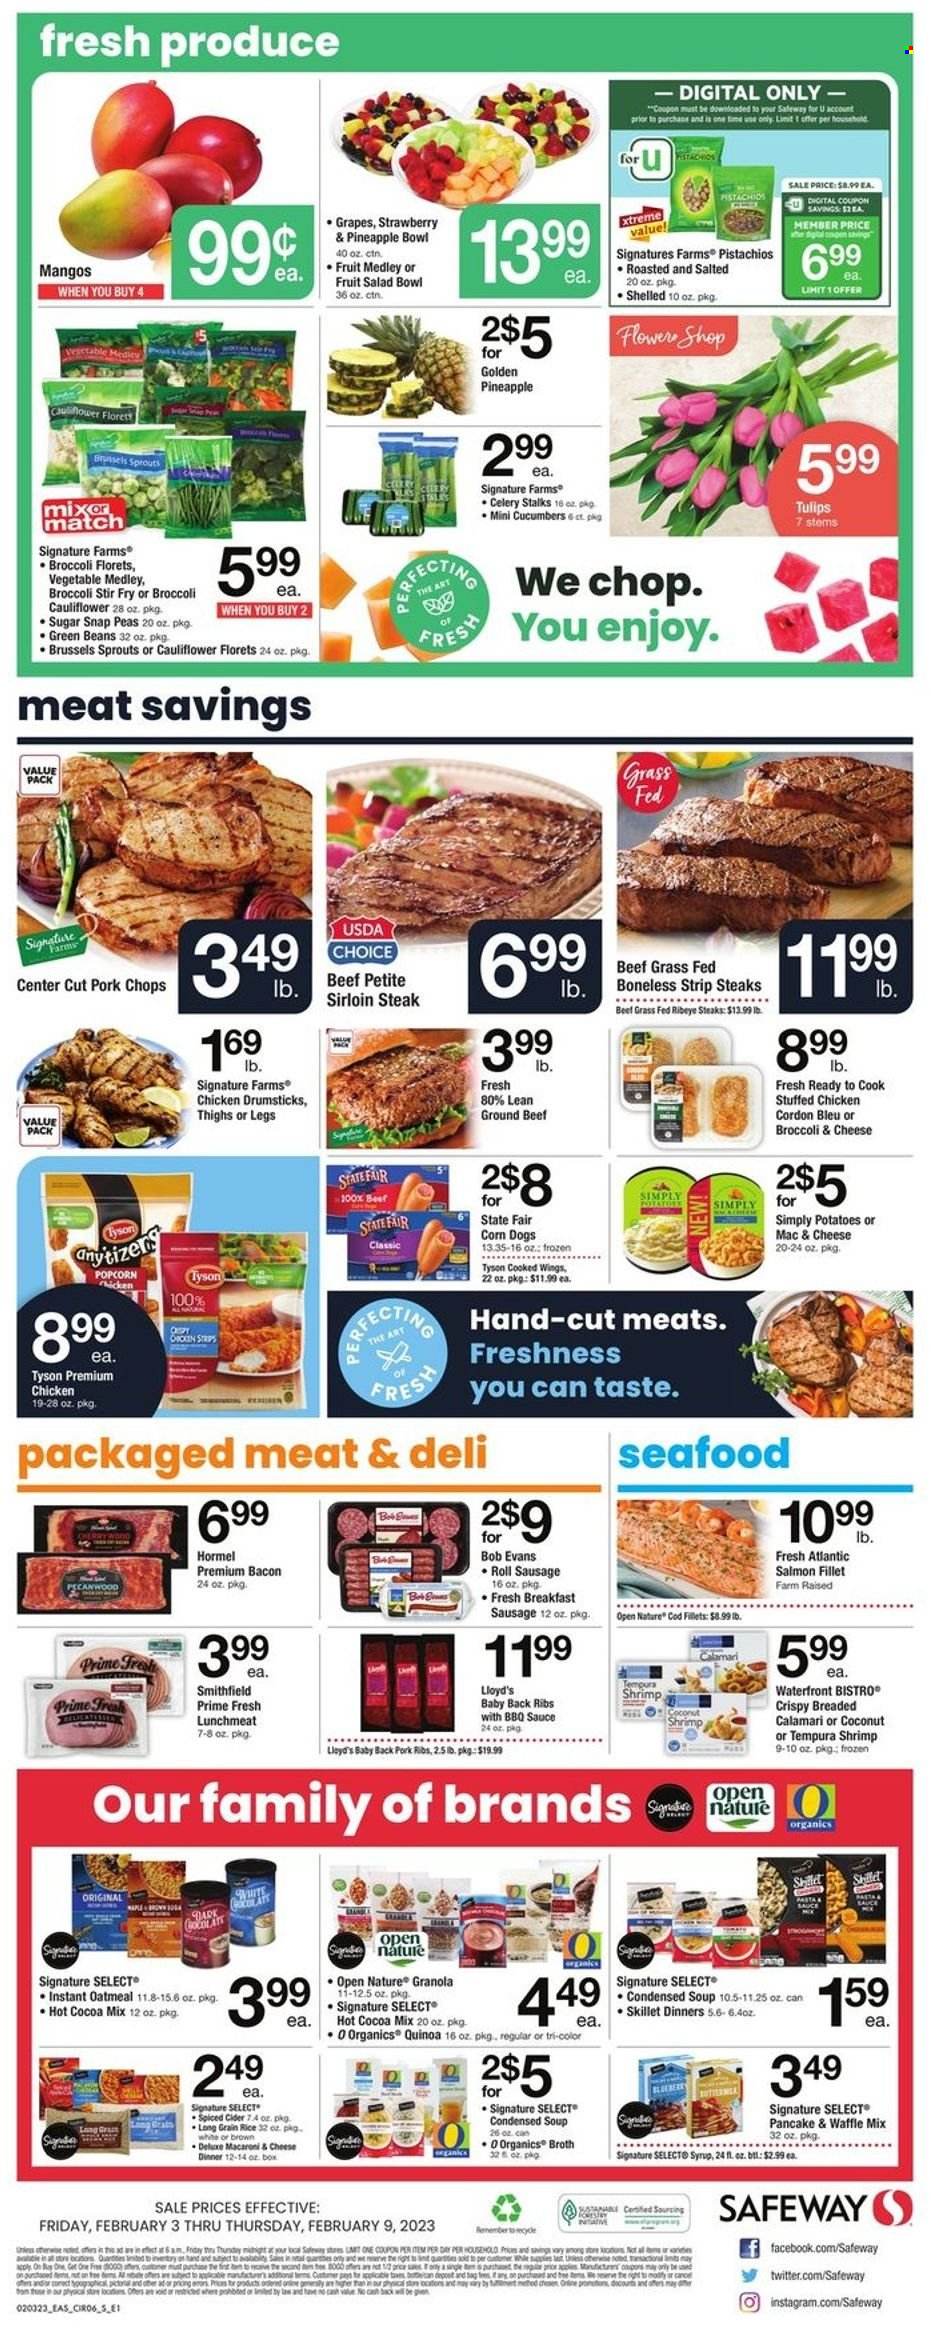 thumbnail - Safeway Flyer - 02/03/2023 - 02/09/2023 - Sales products - beans, broccoli, cauliflower, celery, cucumber, green beans, potatoes, peas, brussel sprouts, sleeved celery, grapes, mango, pineapple, chicken drumsticks, beef meat, beef sirloin, ground beef, steak, sirloin steak, ribeye steak, striploin steak, ribs, Bob Evans, pork chops, pork meat, pork ribs, pork back ribs, calamari, cod, salmon, salmon fillet, seafood, shrimps, condensed soup, soup, sauce, pancakes, instant soup, Hormel, stuffed chicken, bacon, sausage, lunch meat, snap peas, cordon bleu, strips, popcorn, oatmeal, broth, fruit salad, granola, quinoa, long grain rice, BBQ sauce, syrup, pistachios, hot cocoa, cider, salad bowl, tulip. Page 6.